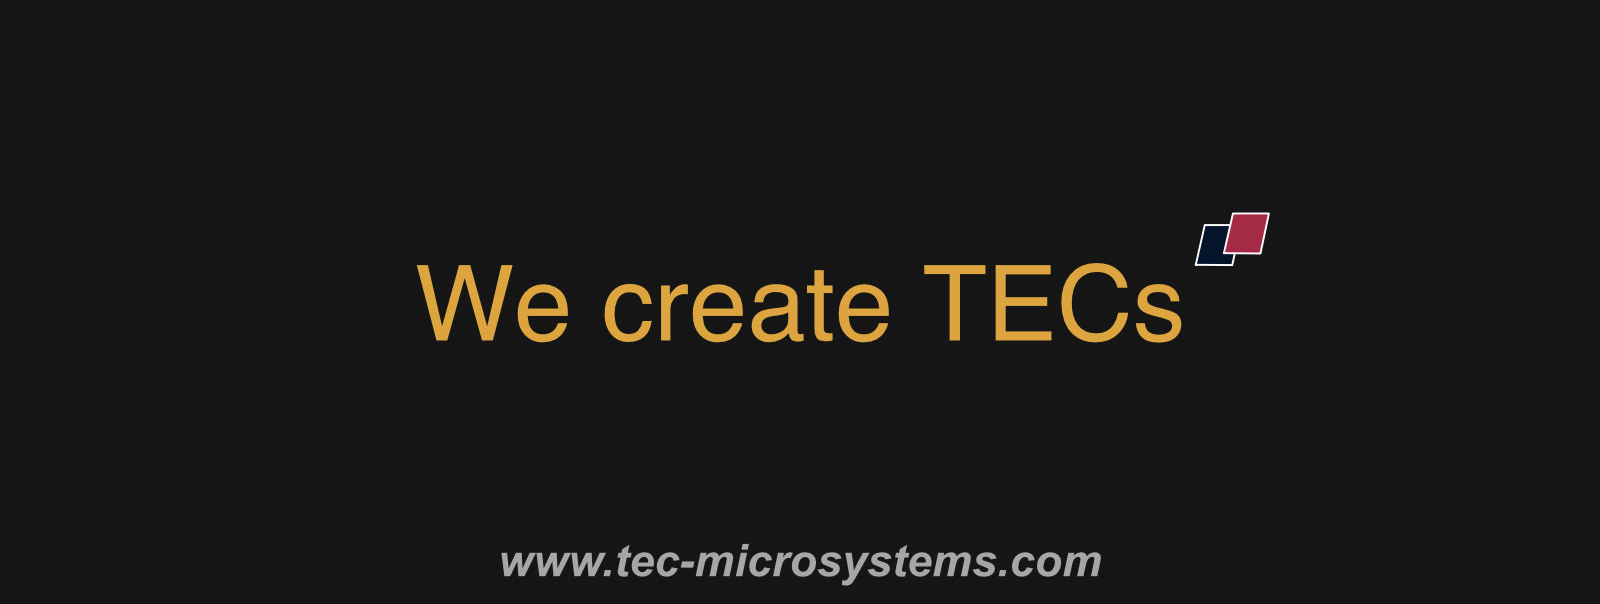 TEC Microsystems GmbH  - advanced miniature thermoelectric solutions.  We create TECs.